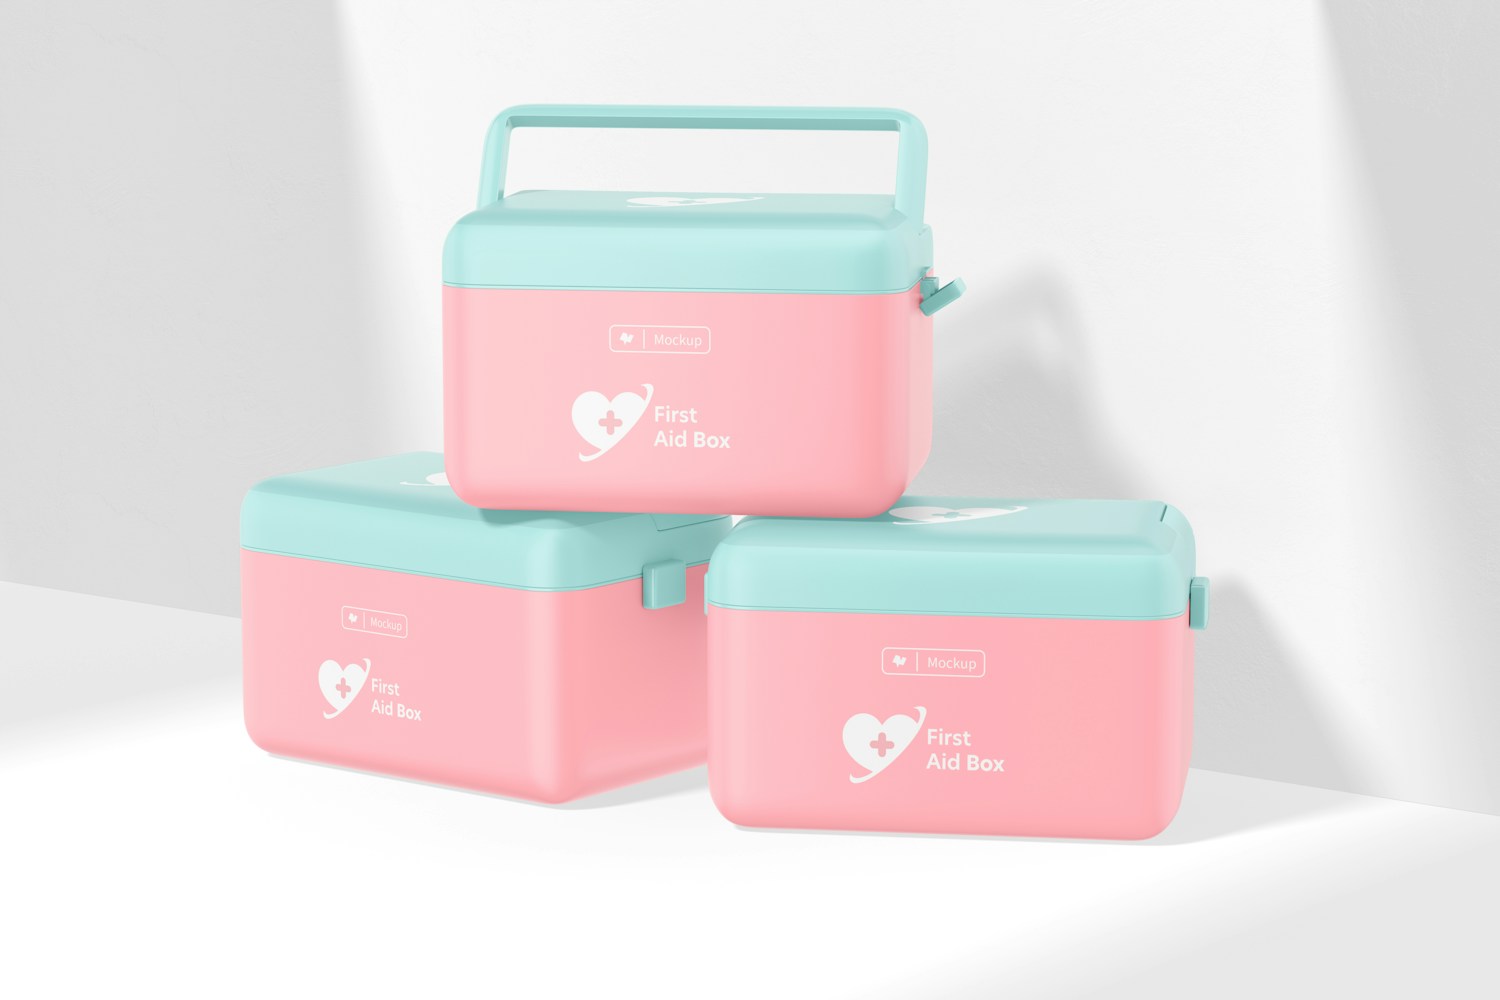 First Aid Boxes Mockup, Stacked